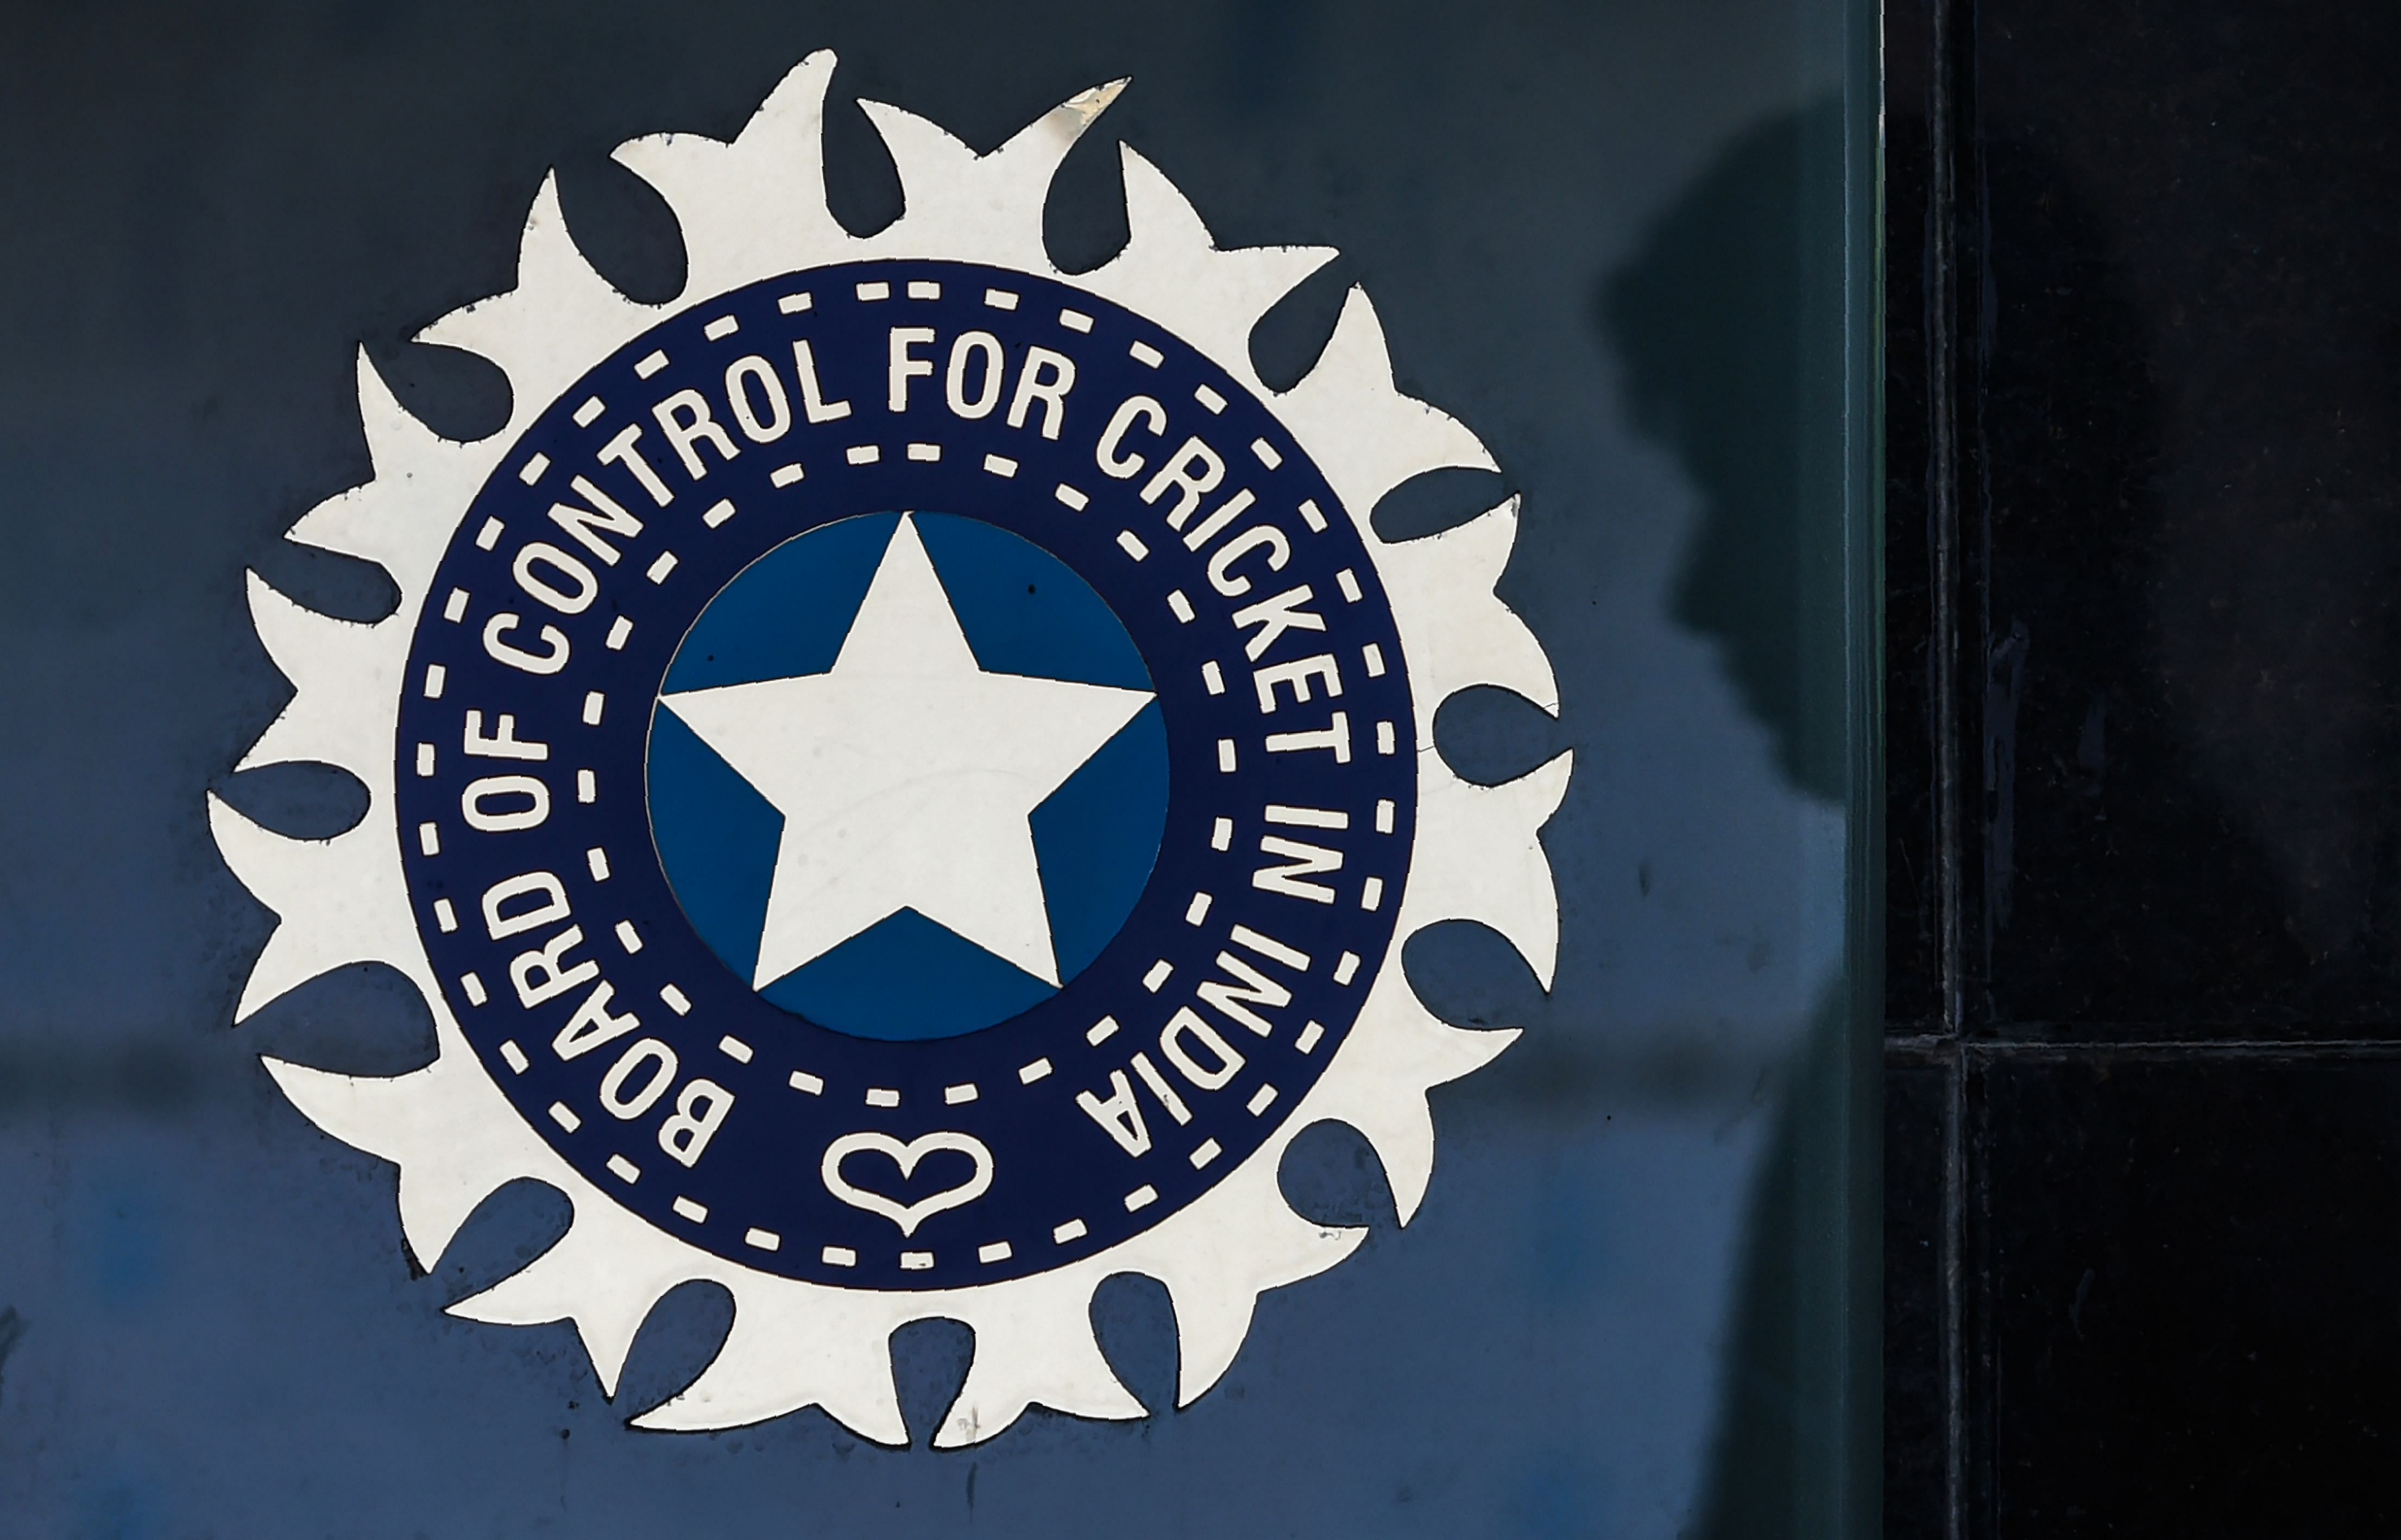 It is learnt, some BCCI are officials are of the view that unless VIVO backs out on its own in prevailing circumstances, the board should honour the remainder of the contract, which ends in 2022. Representative image/Credit: AFP Photo